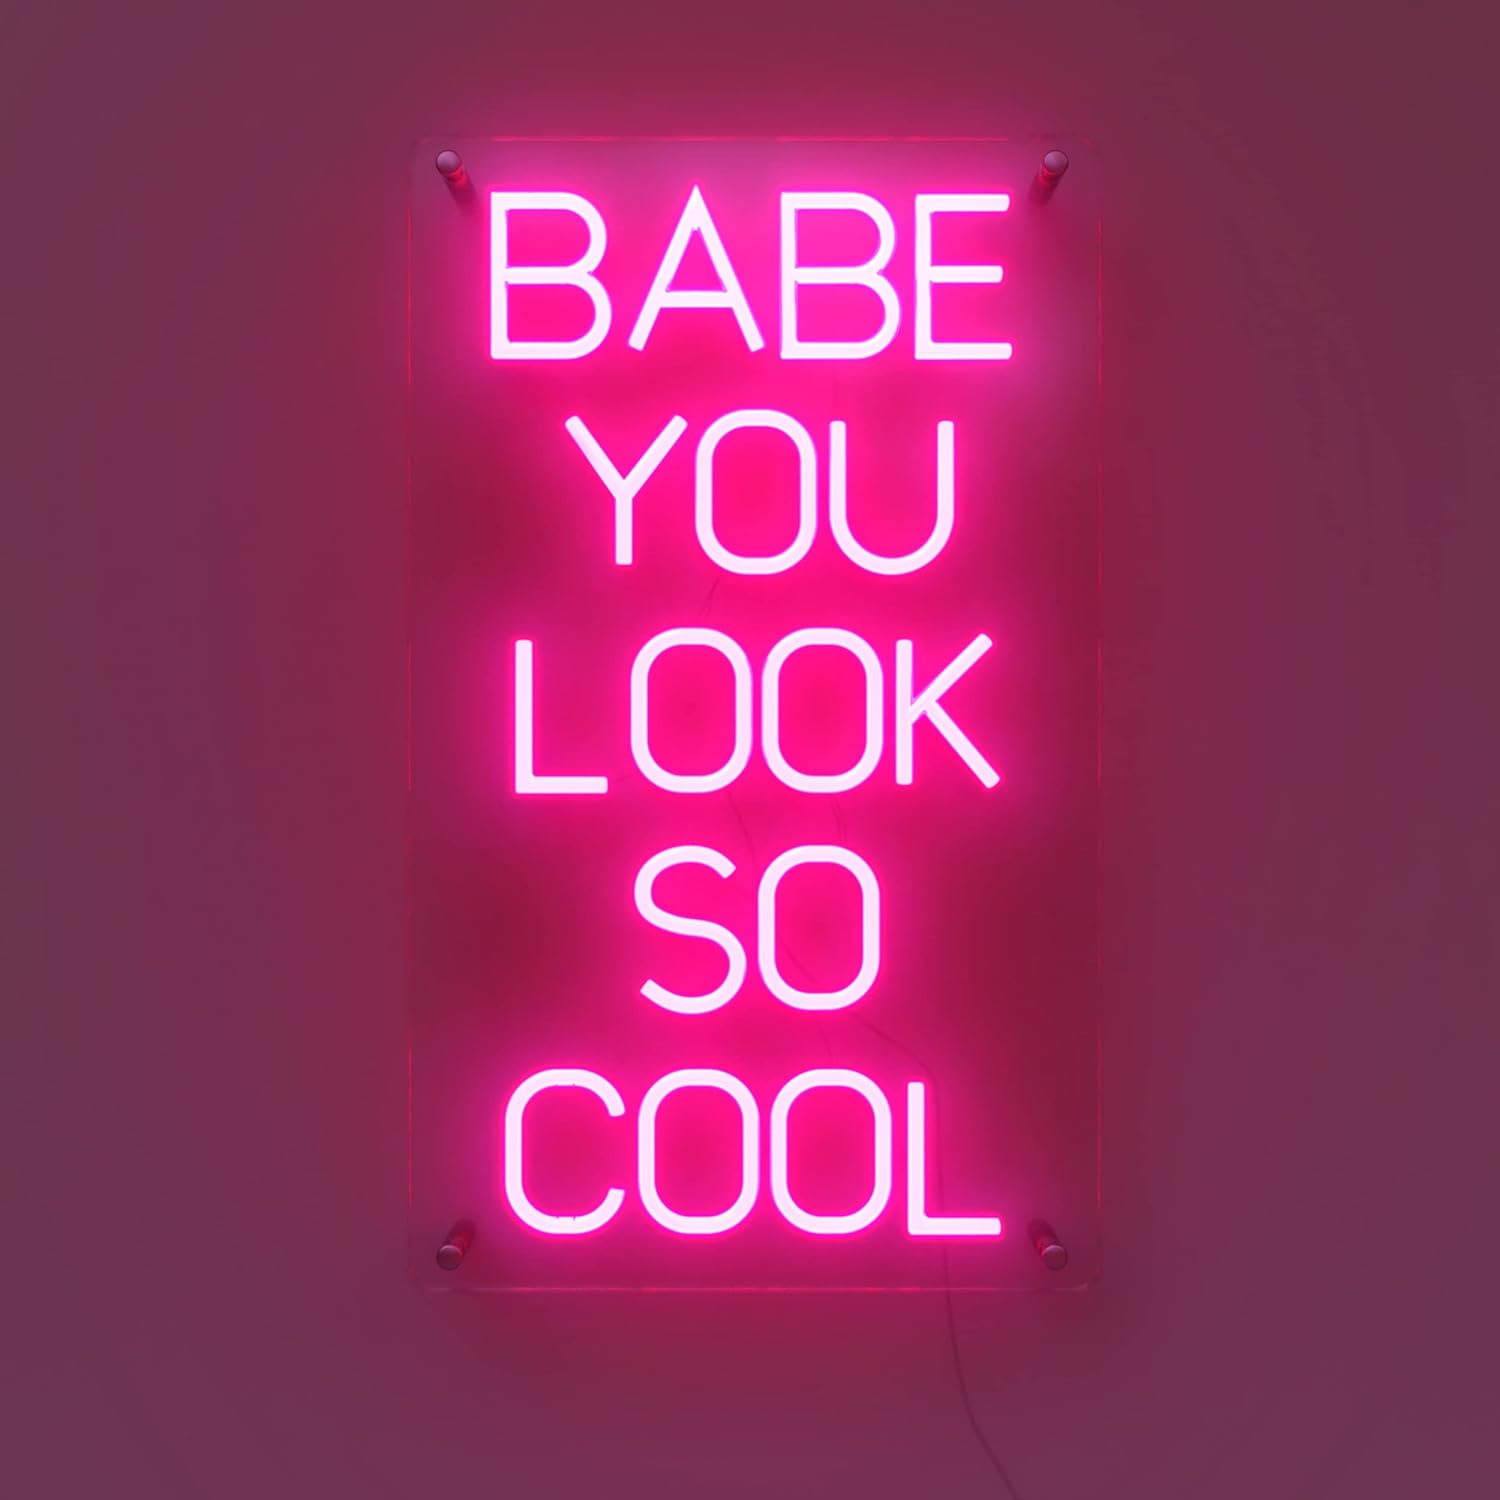 Premium American Brand |  “Babe You Look so Cool” Large Neon Sign | Safe Acrylic